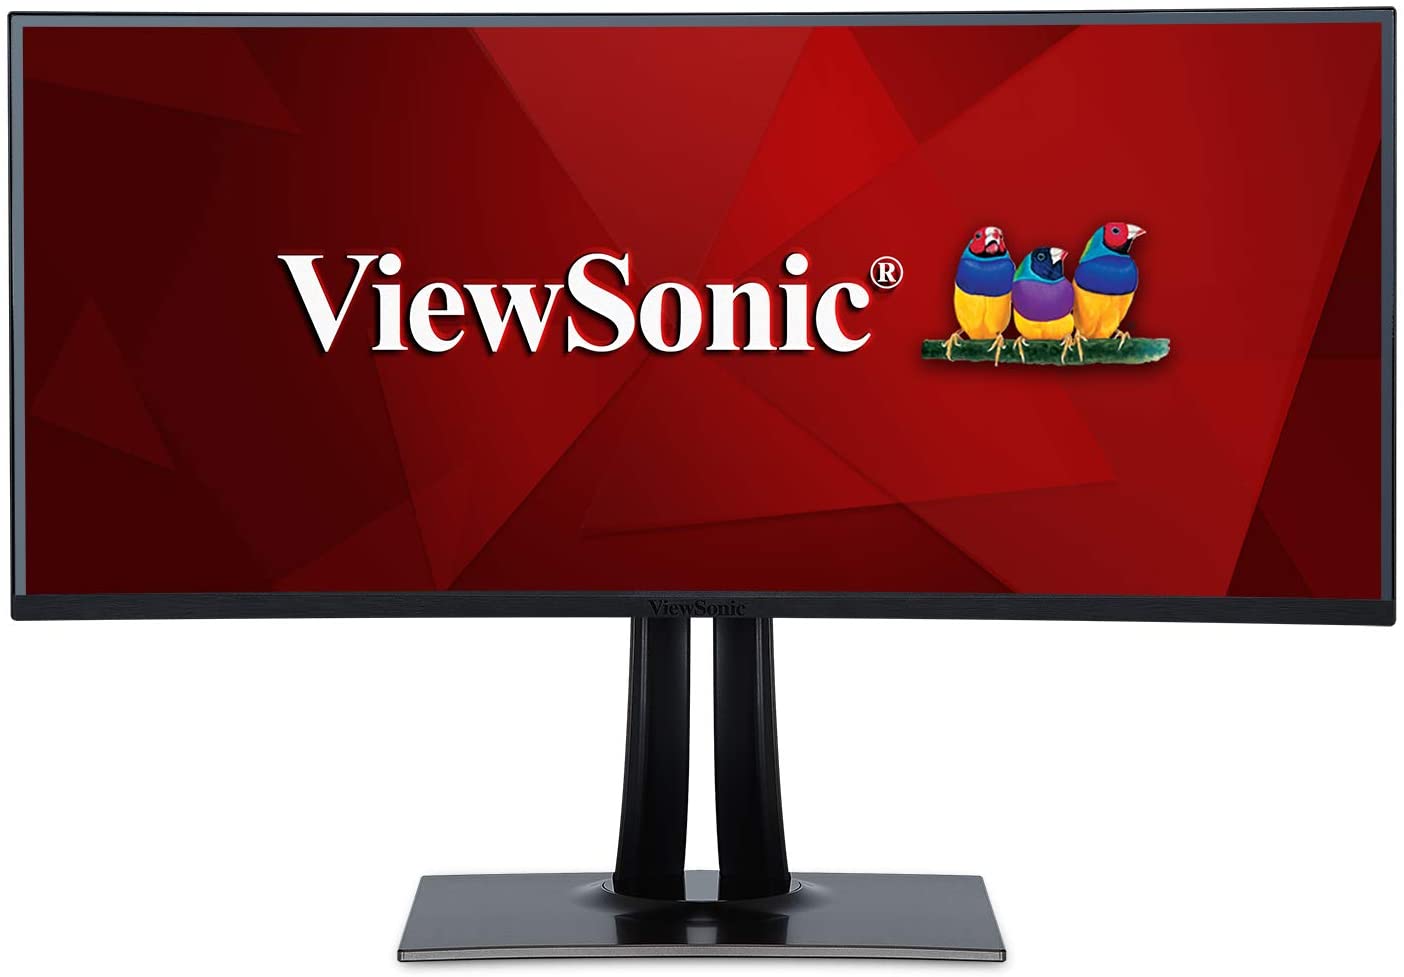 ViewSonic VP3881 Review image 